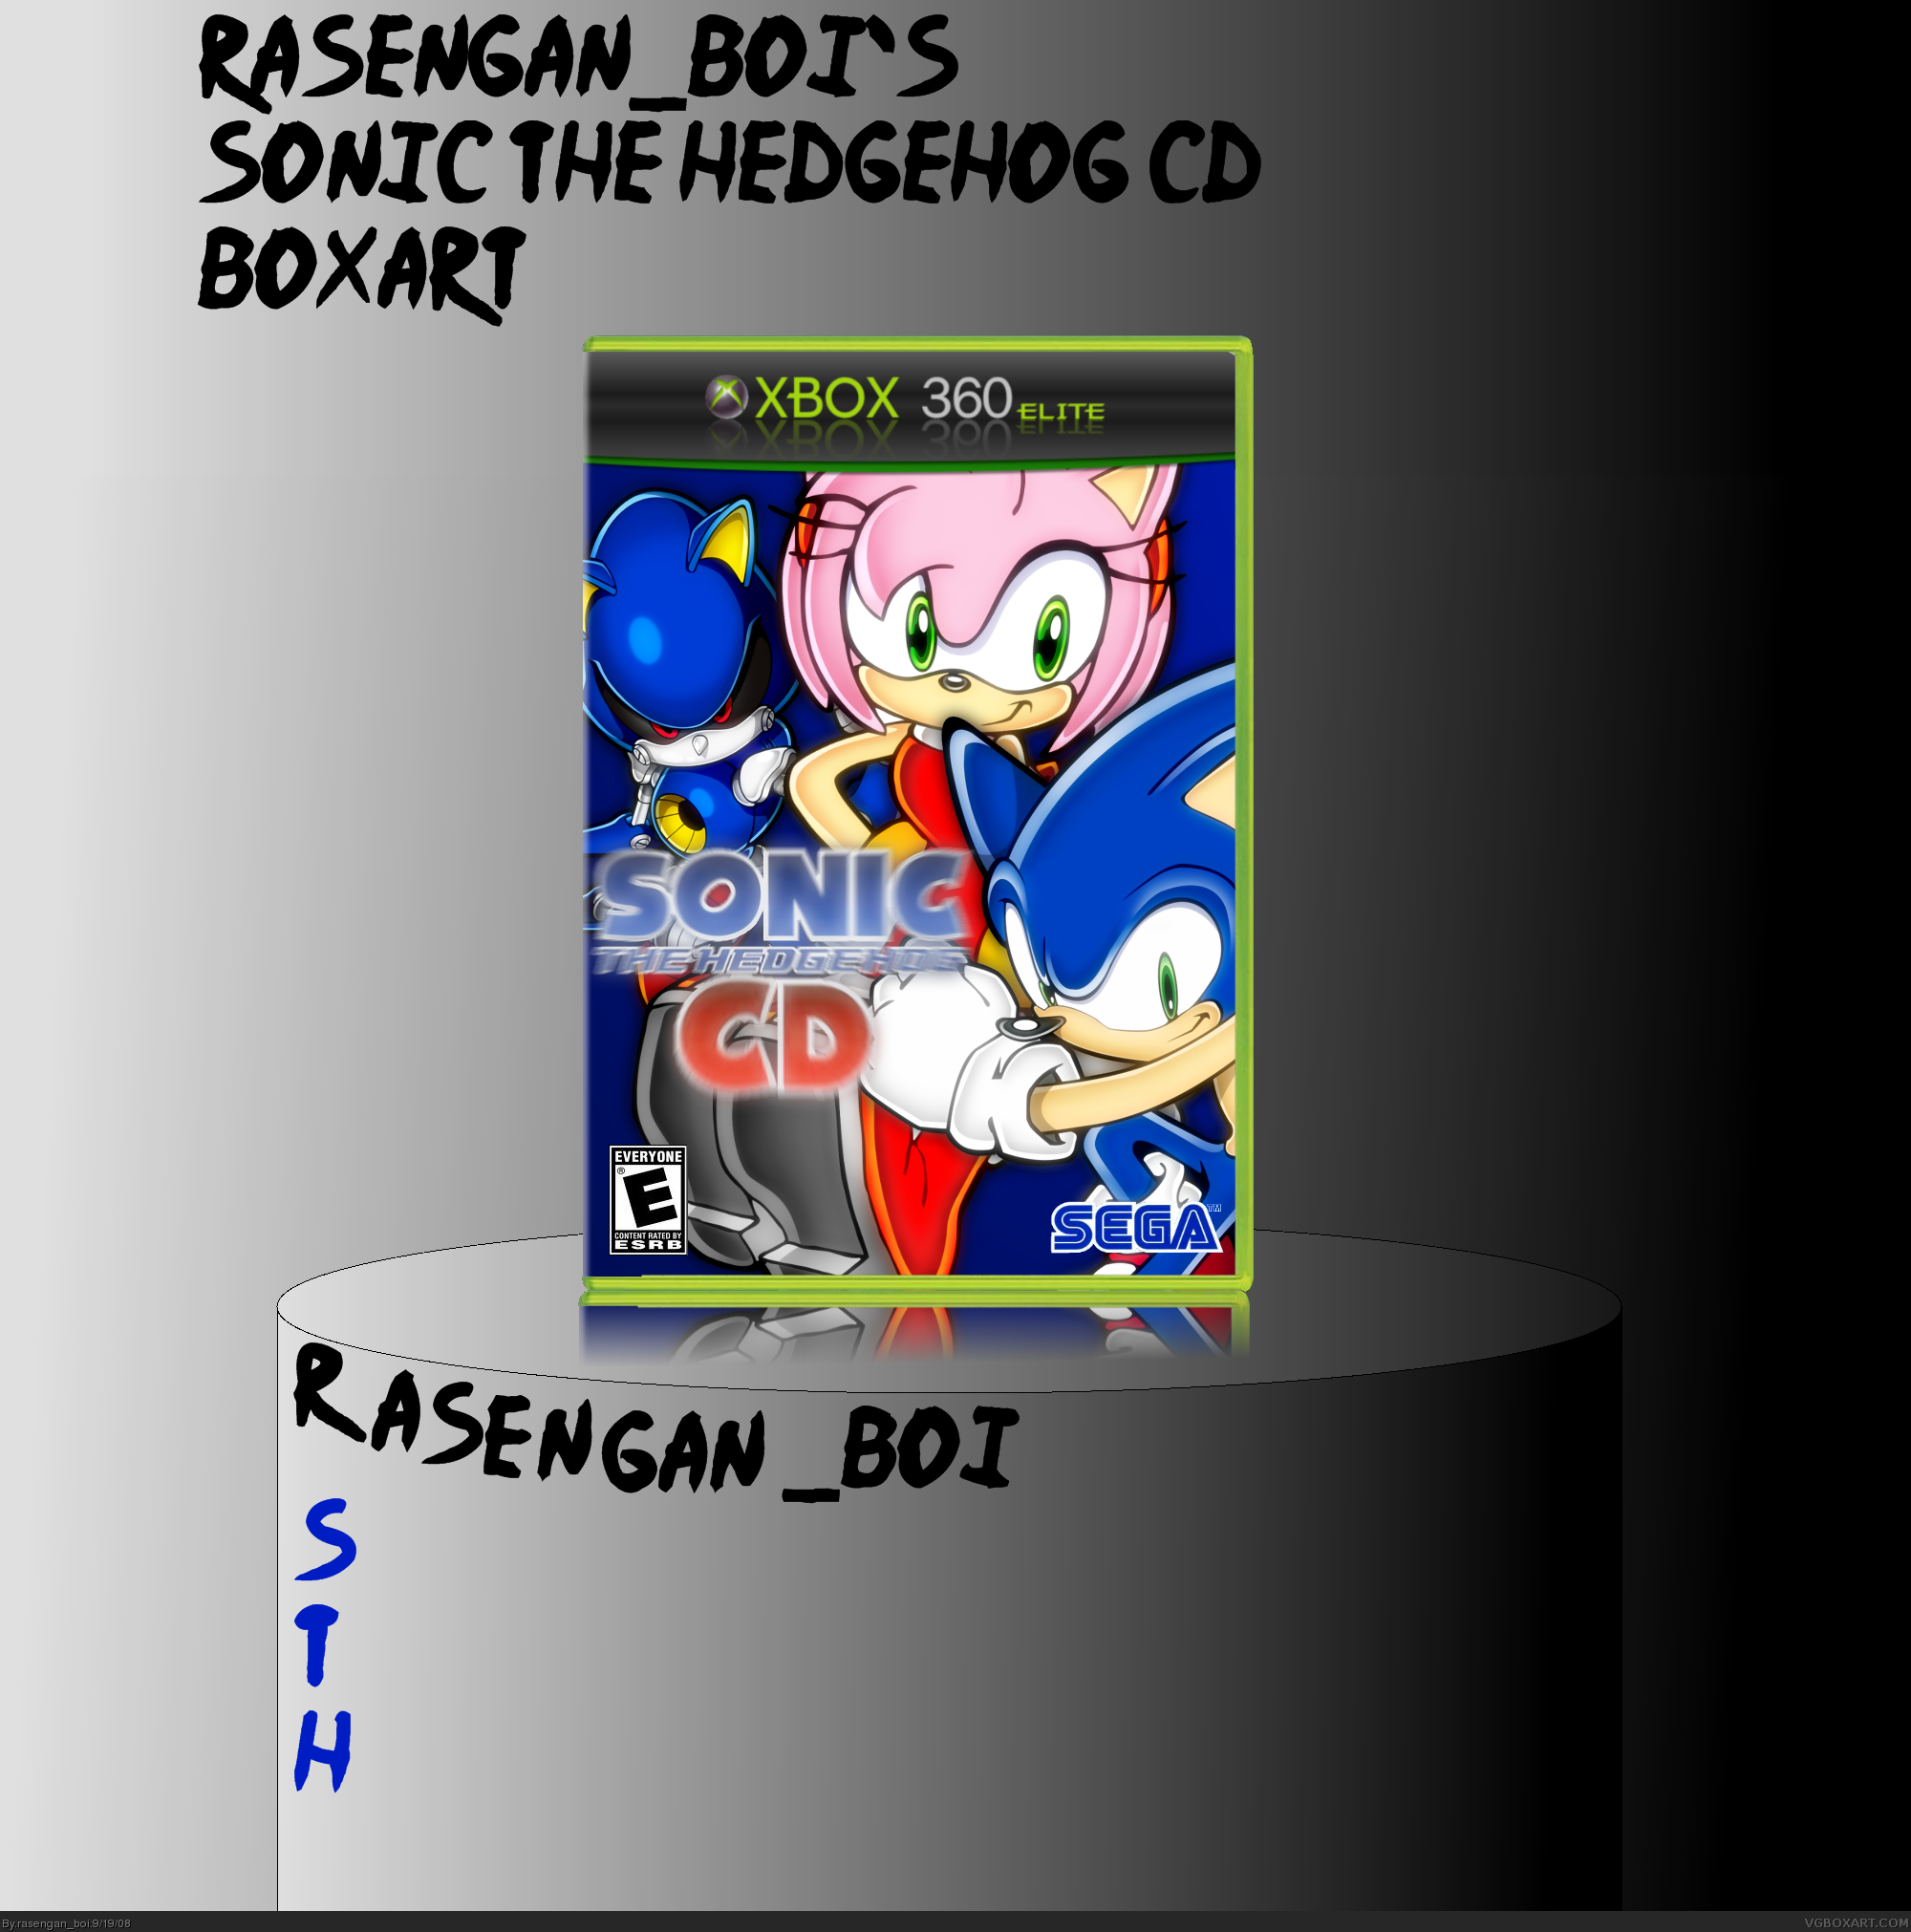 Sonic the Hedgehog CD box cover